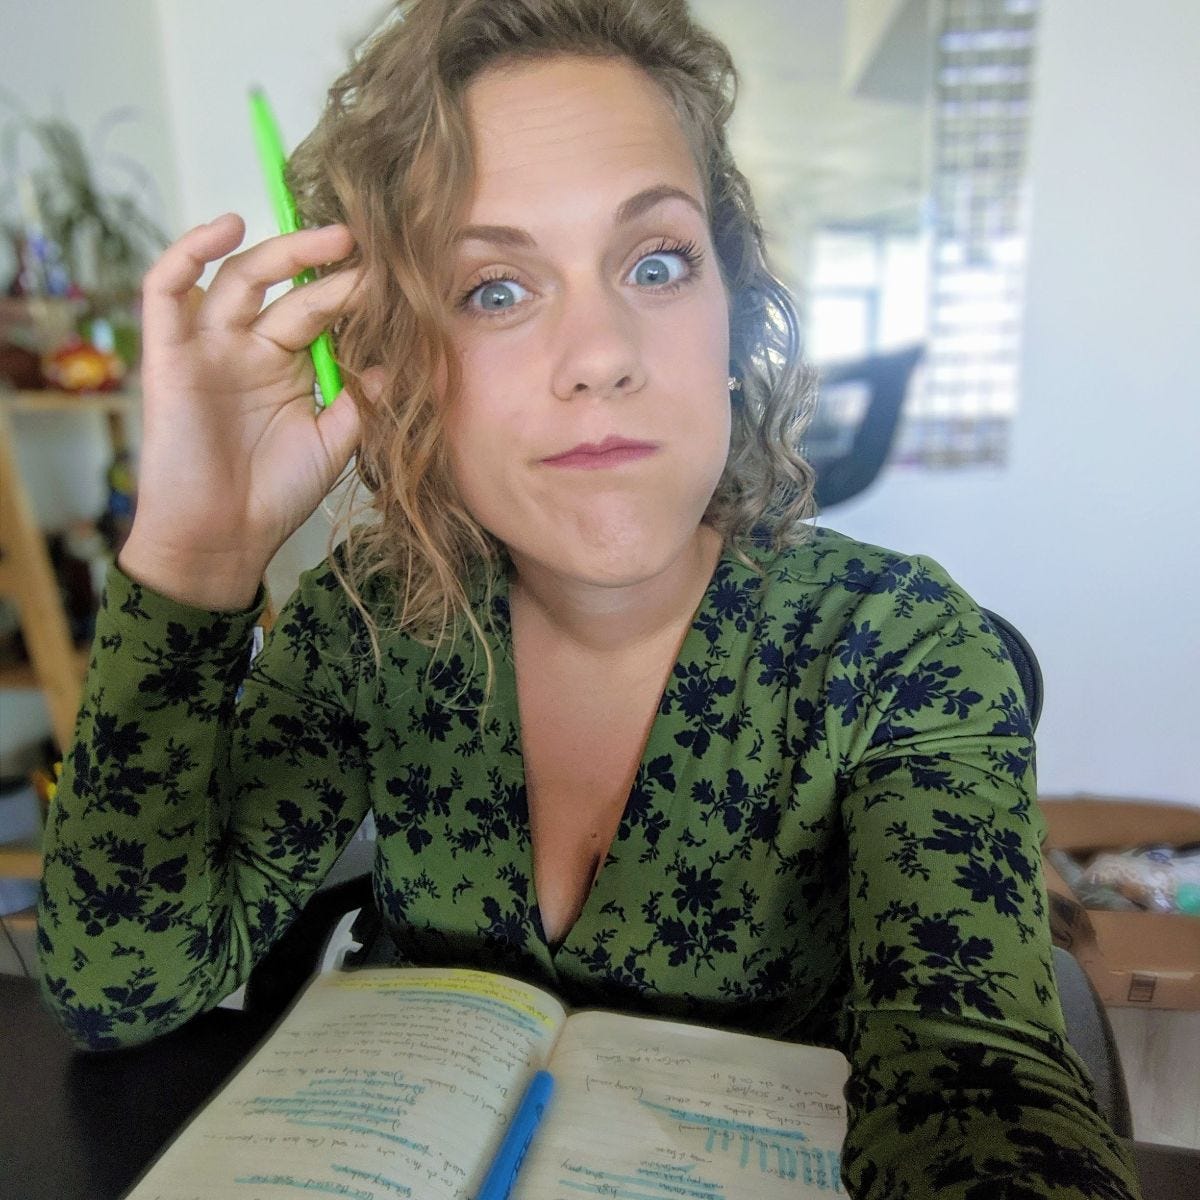 a white woman in a green wrap dress making a silly face and holding a green highlighter